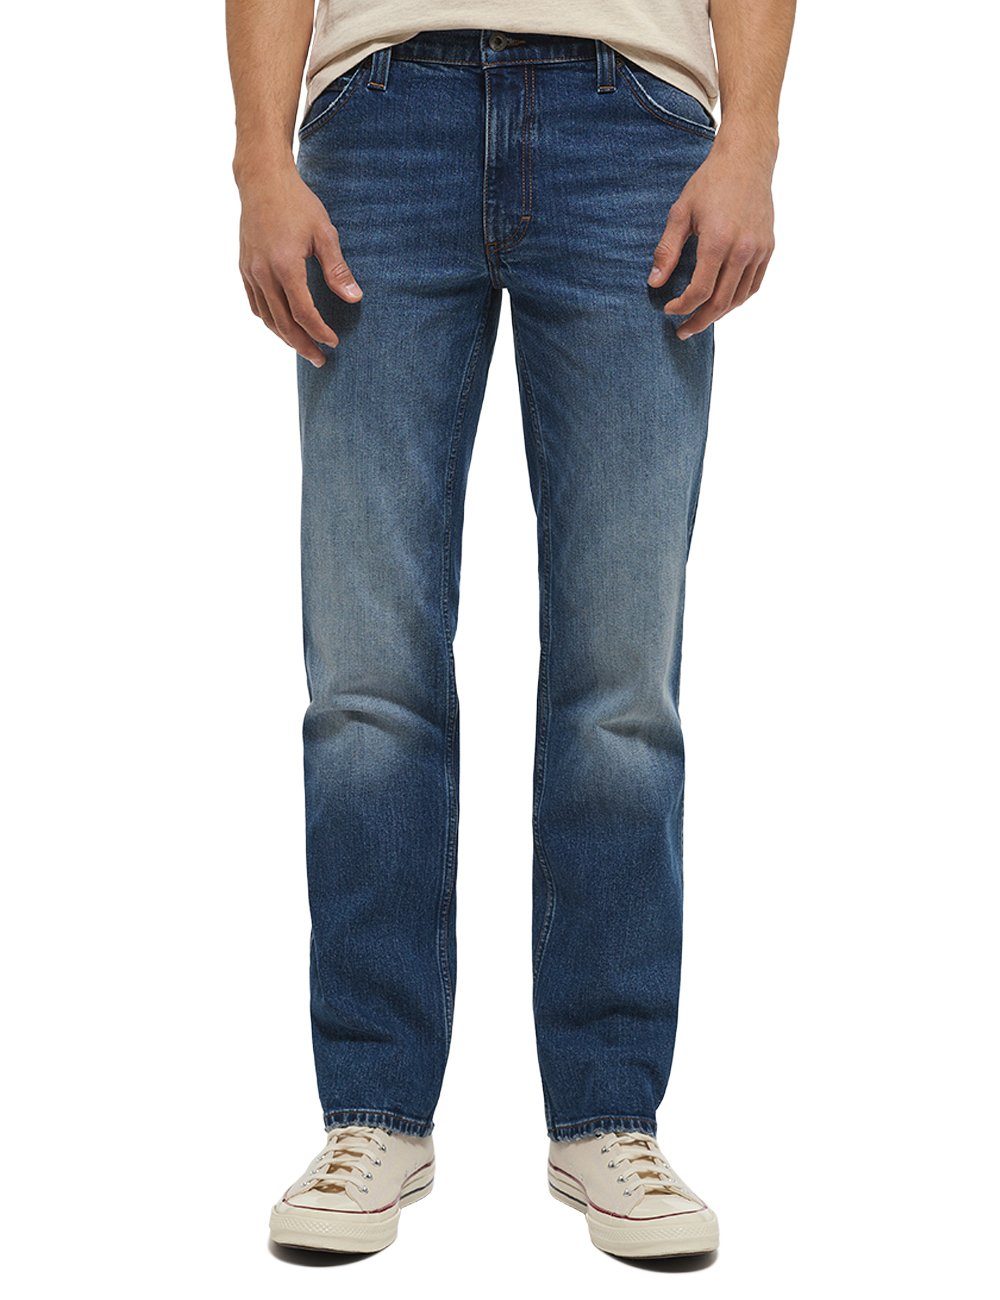 MUSTANG Bequeme Jeans Style Tramper